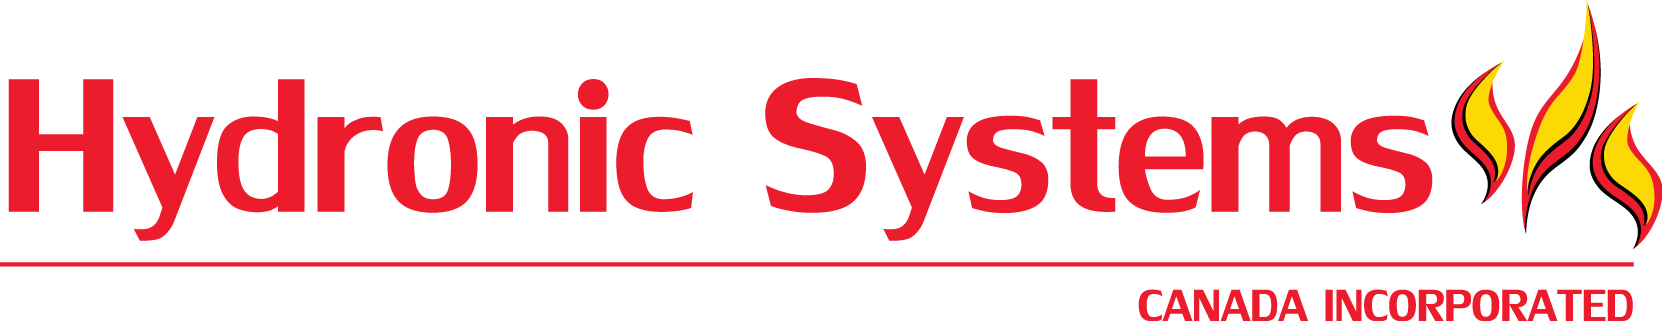 Hydronic Systems Logo